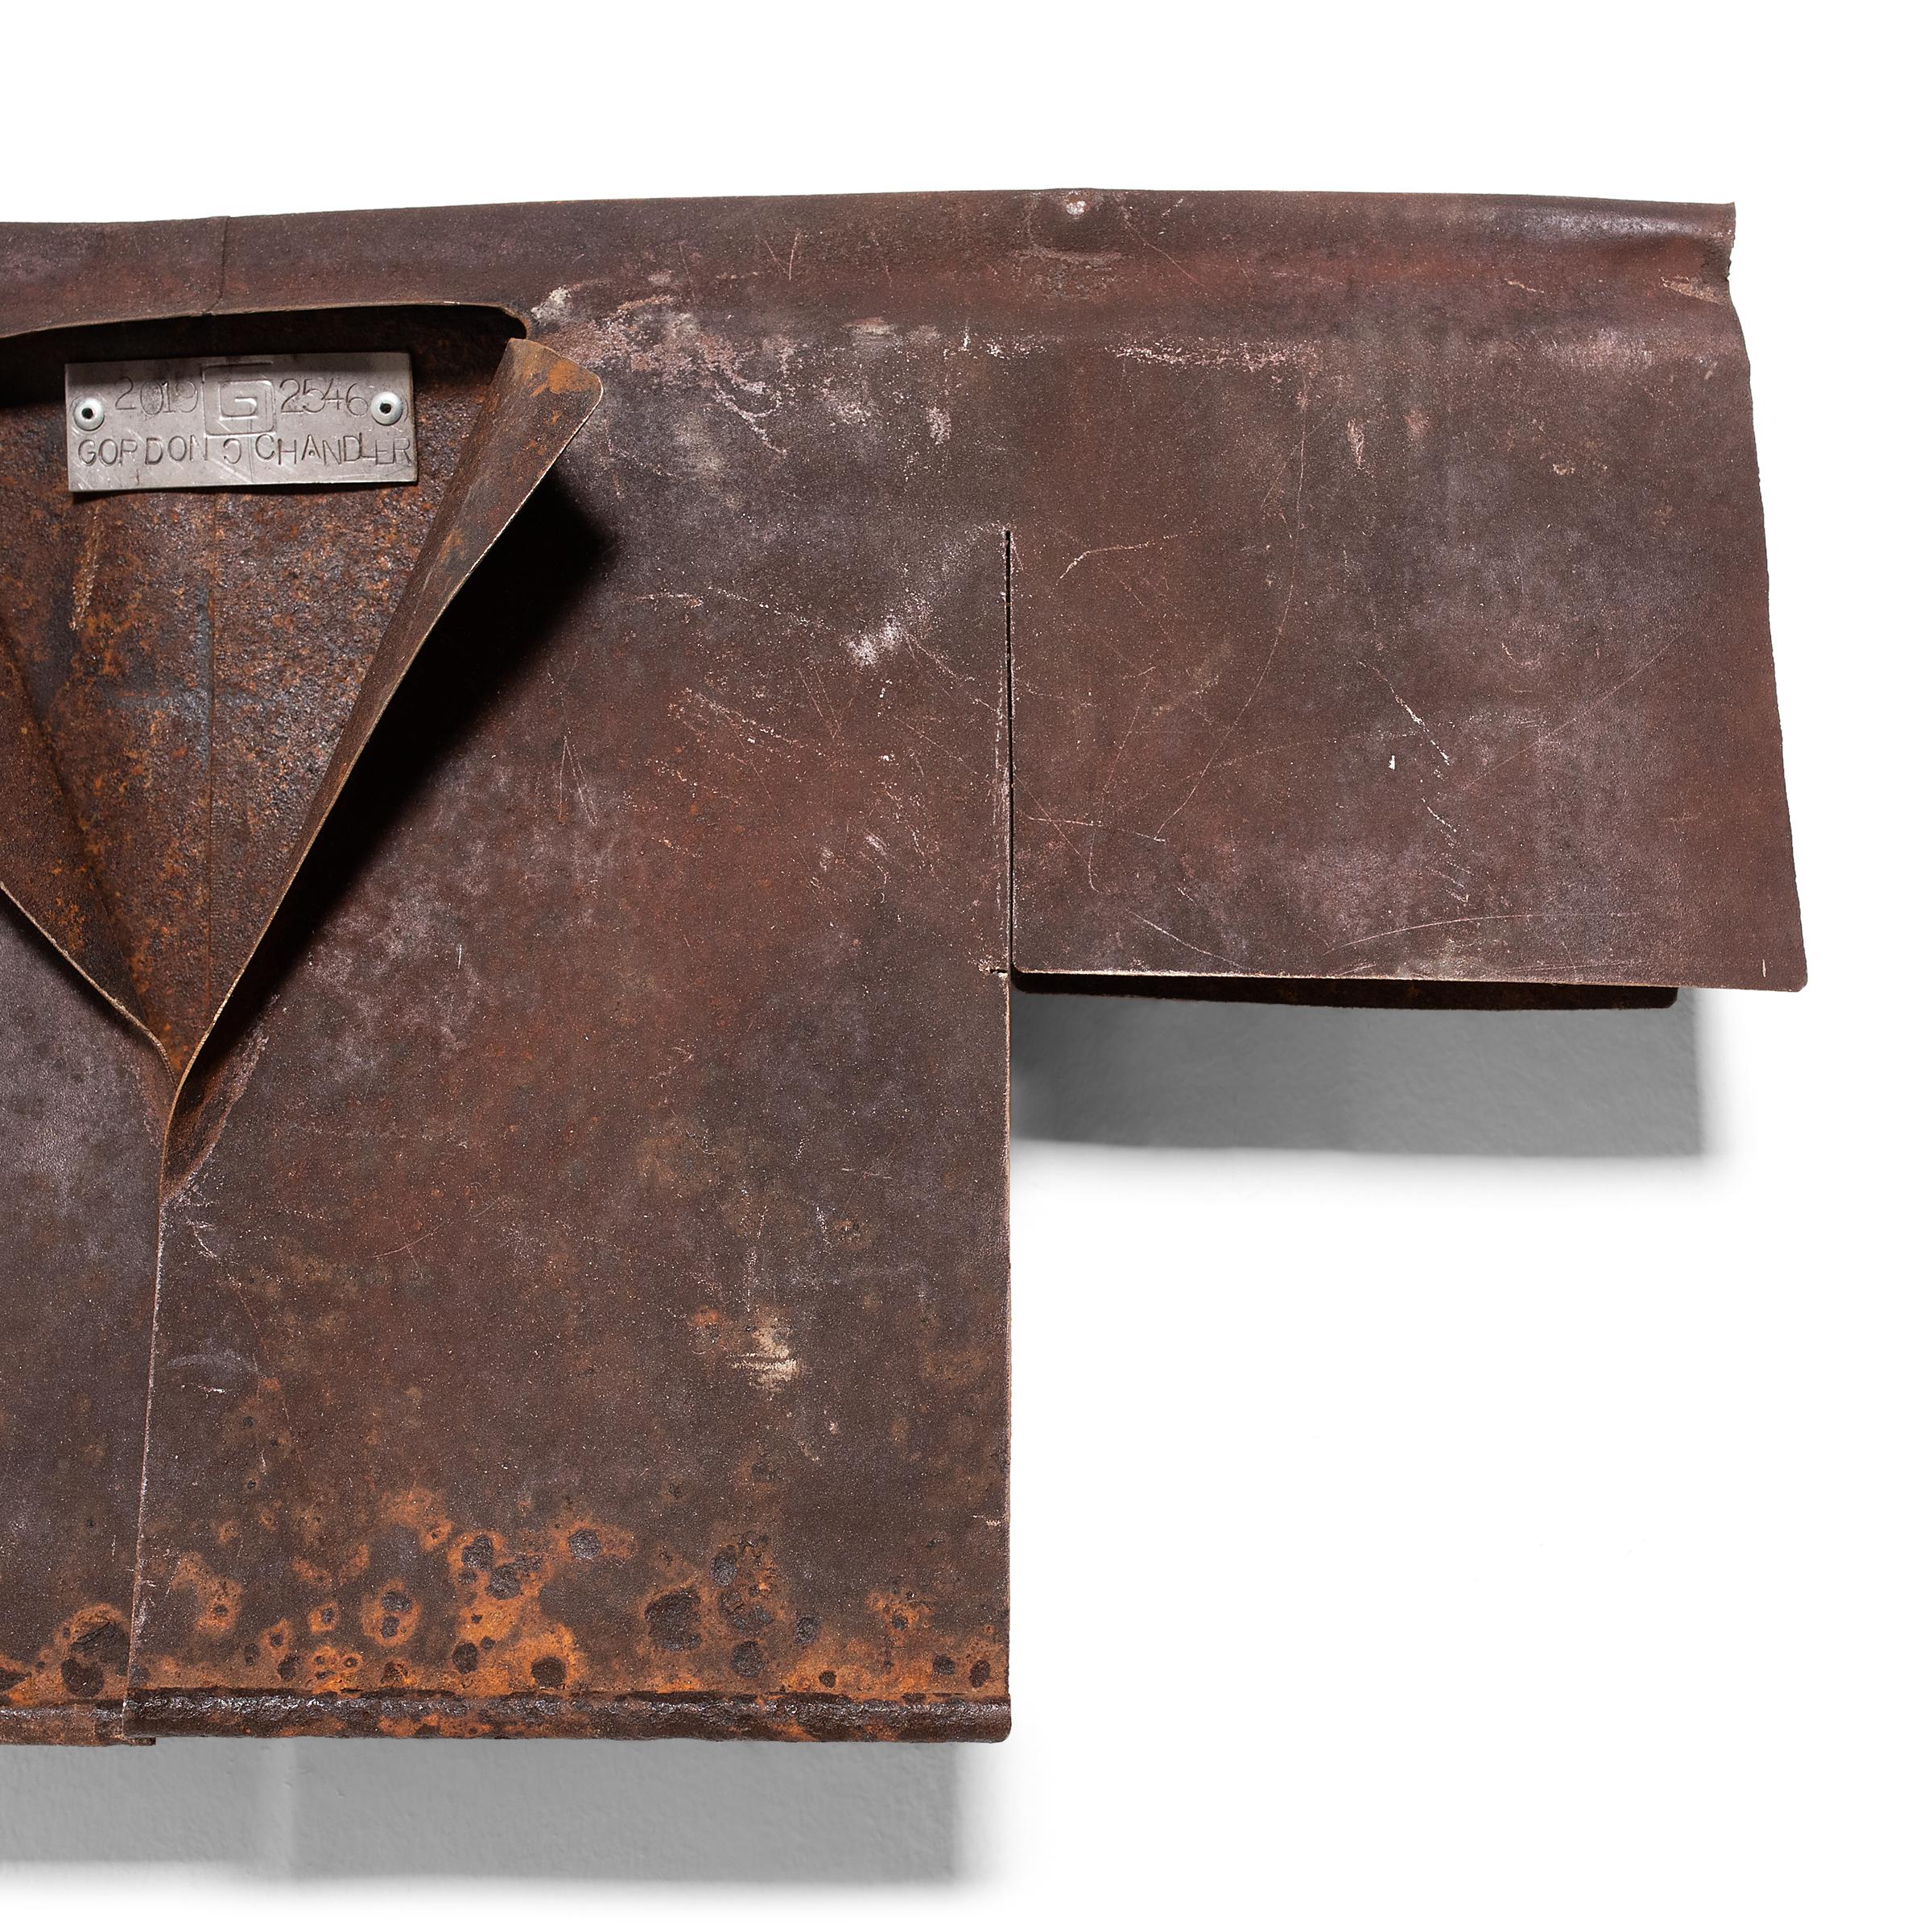 Rust Jacket - Brown Abstract Sculpture by Gordon Chandler